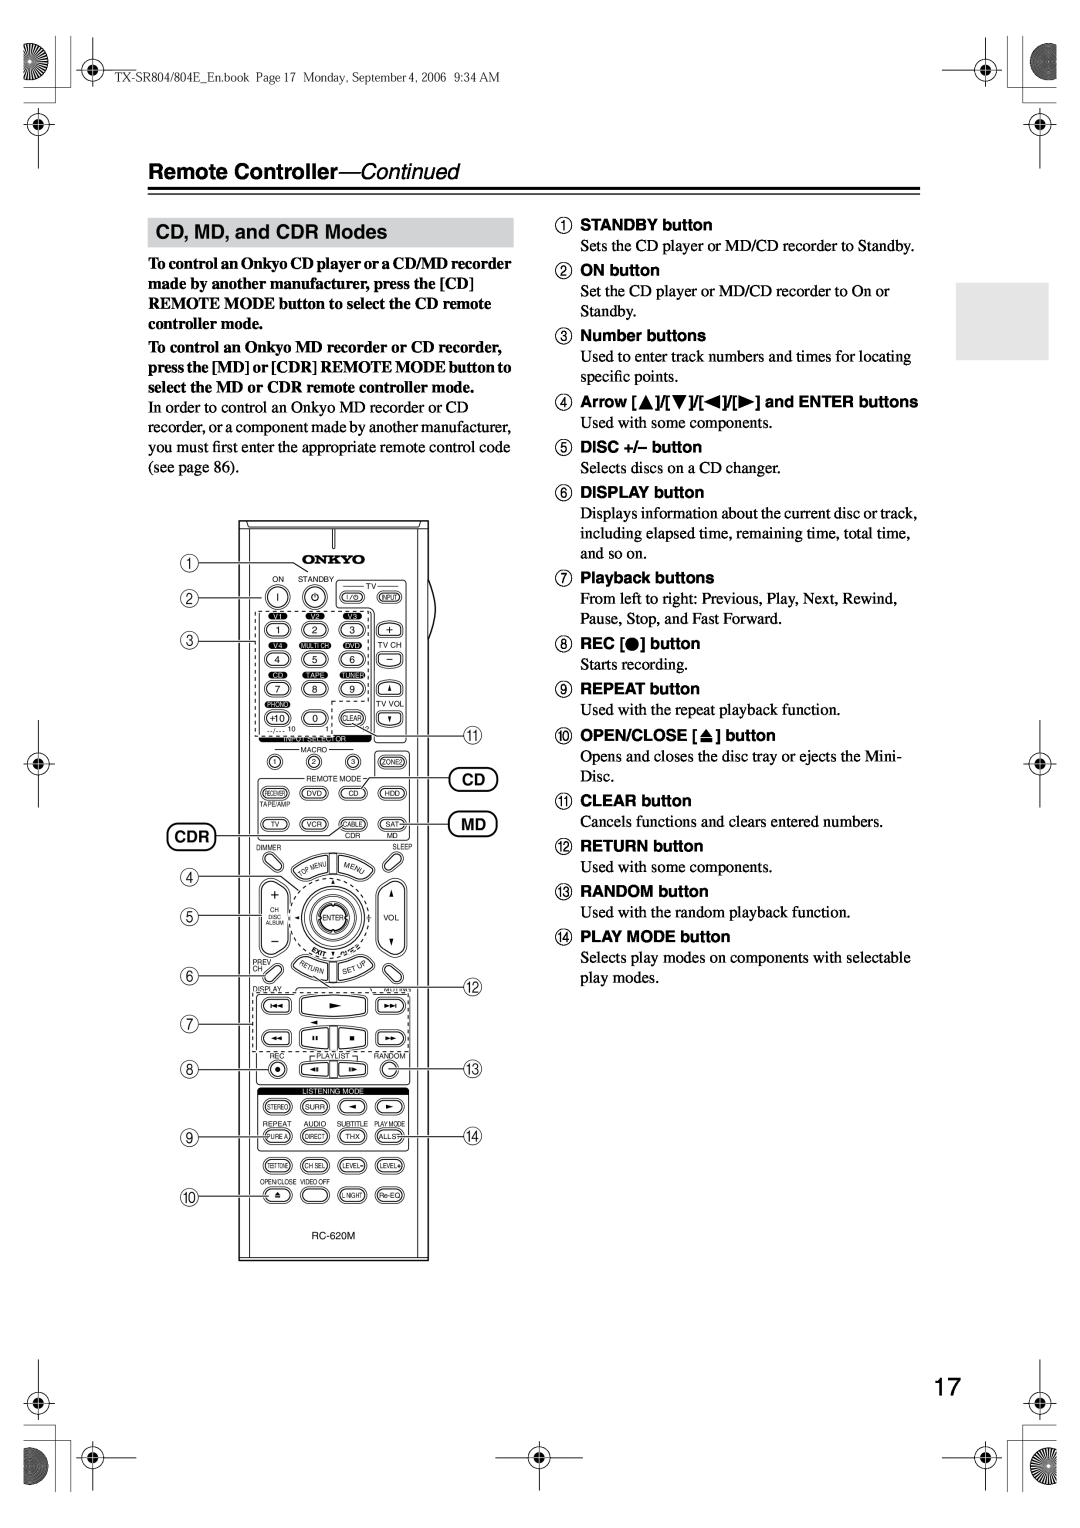 Onkyo TX-SR804E instruction manual CD, MD, and CDR Modes, Remote Controller—Continued 